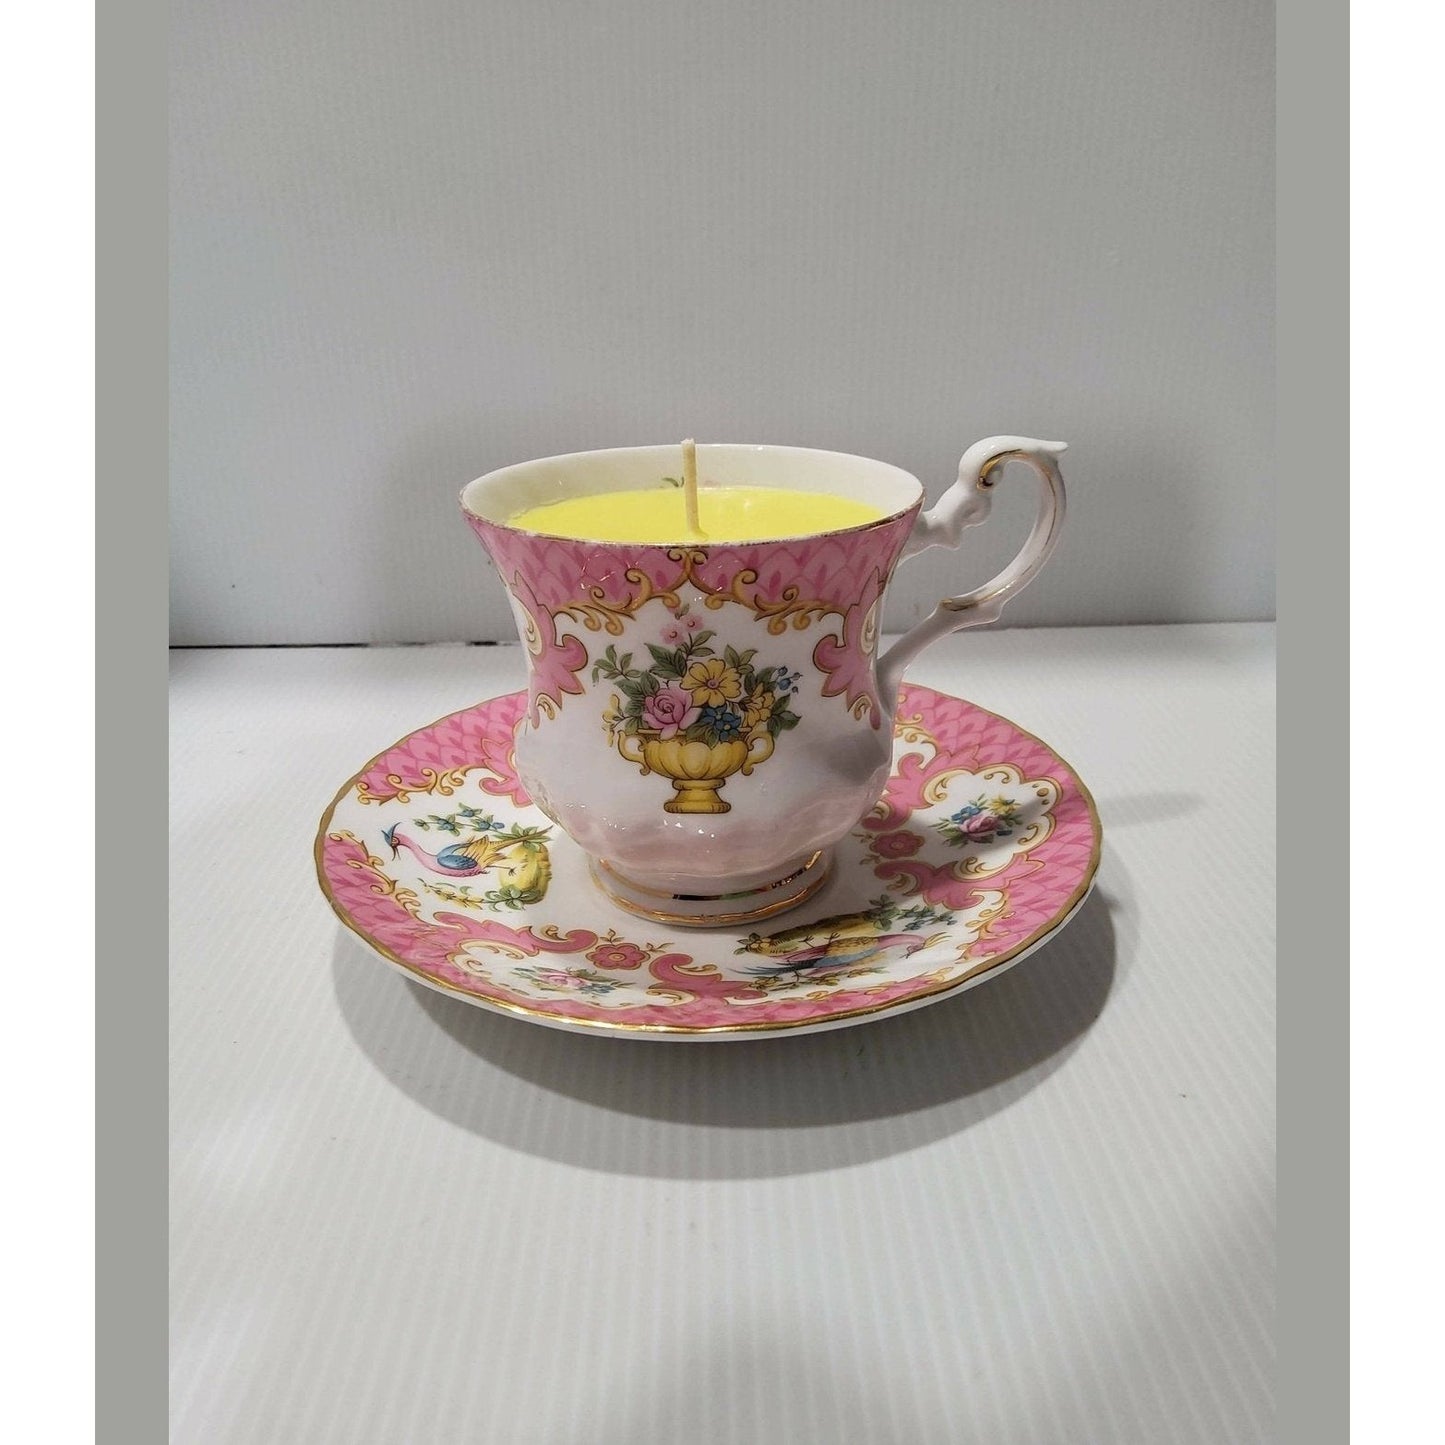 Teacup Candle - Soy Candle - Vintage Teacup - Victorian Rose Fragrance - Free Shipping - AMD Touring